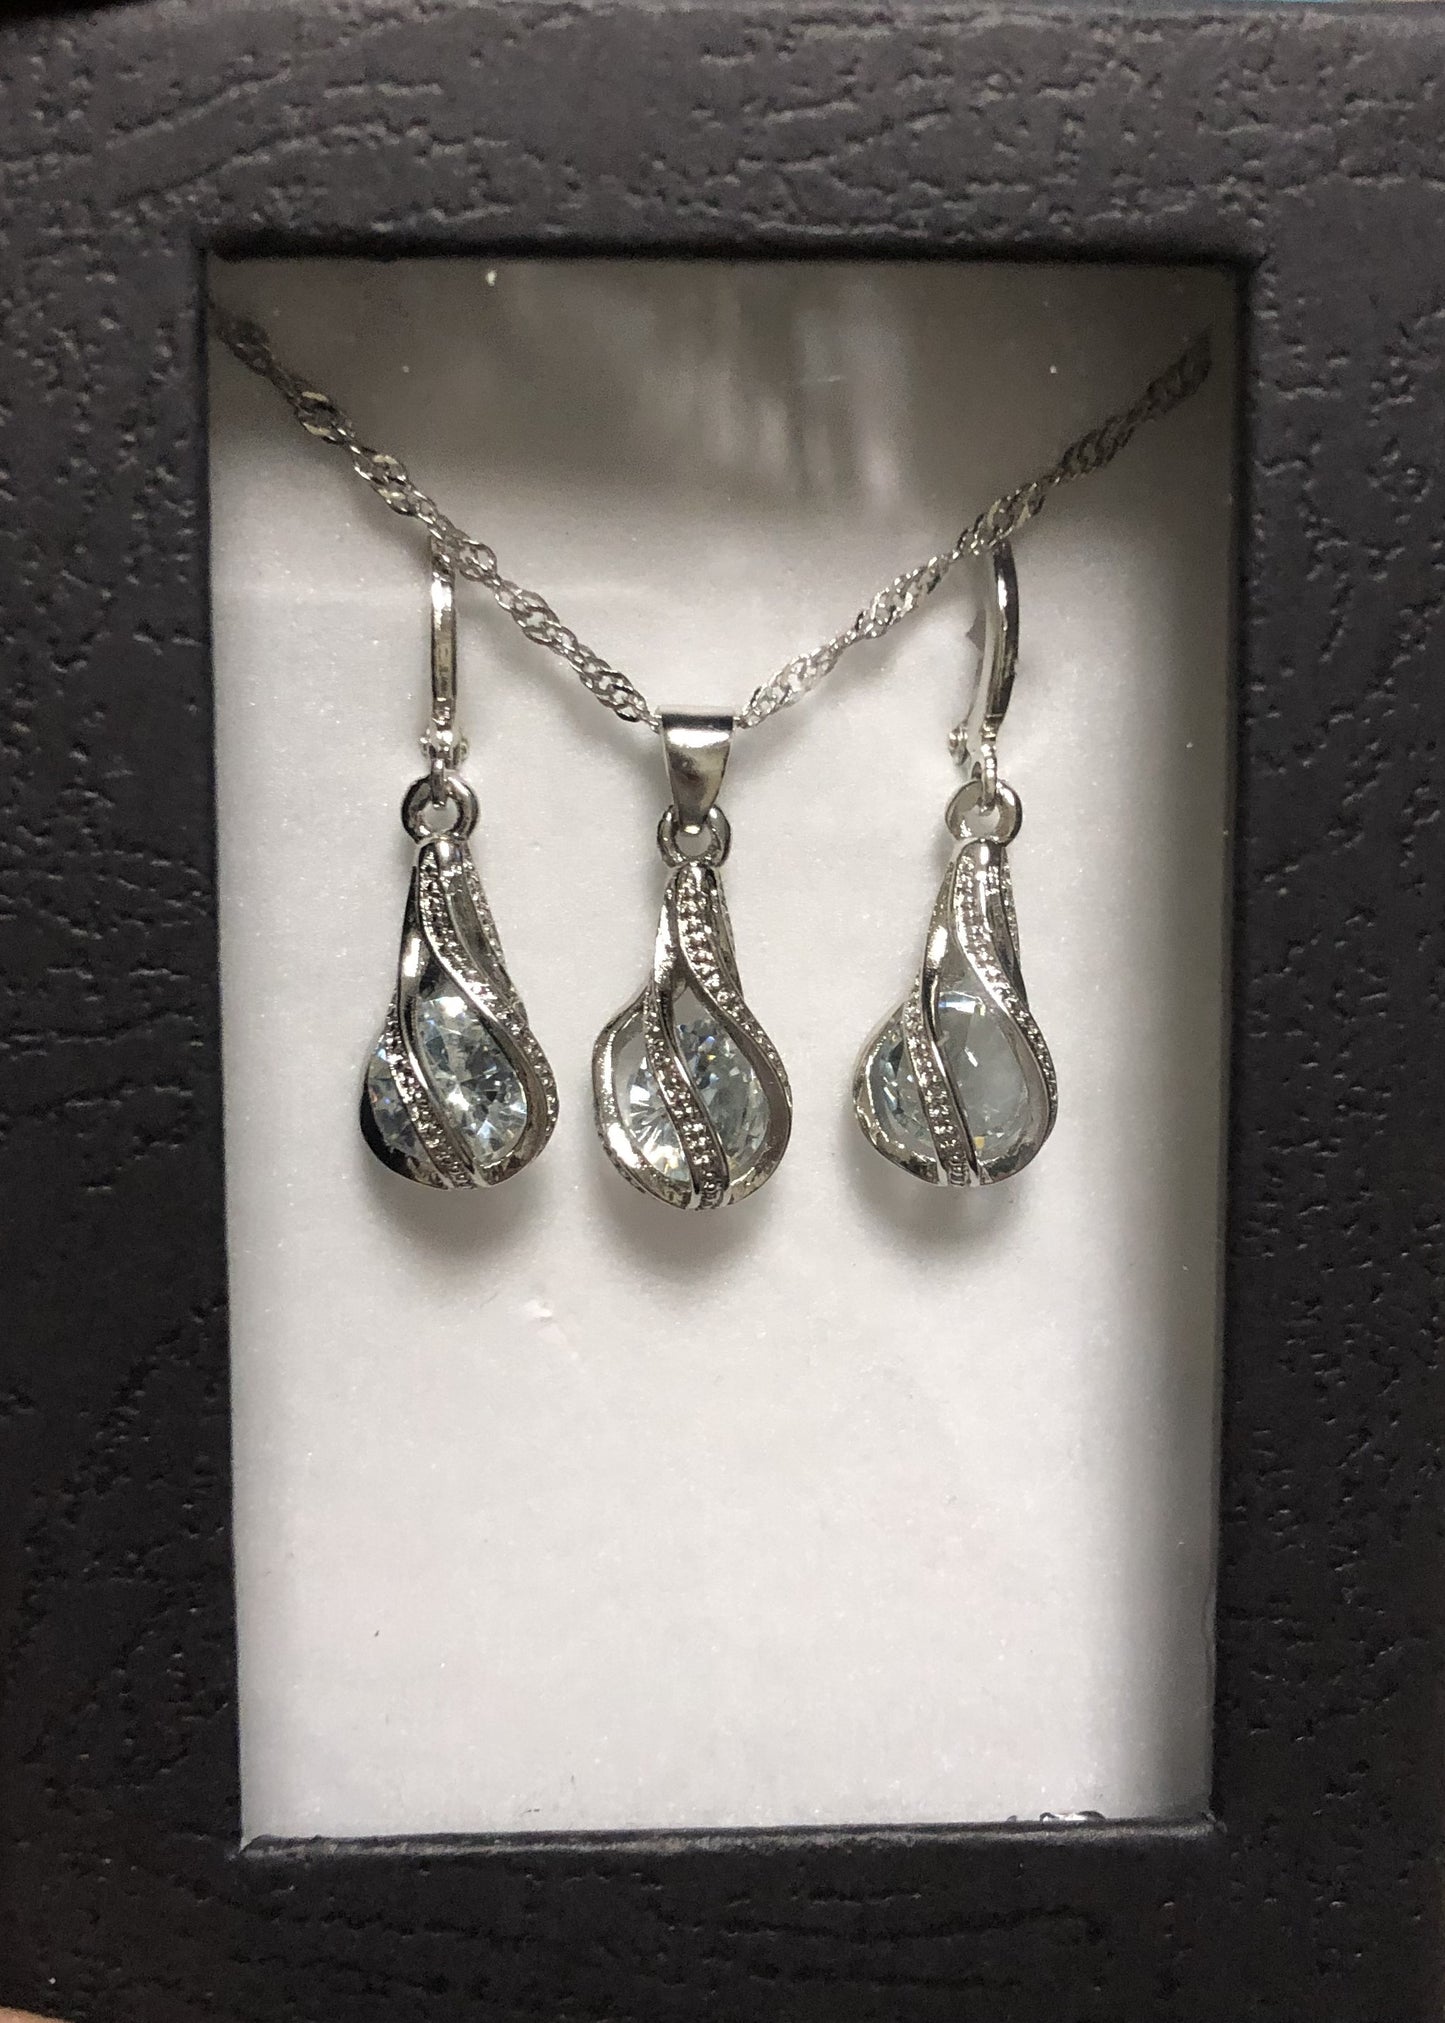 Sterling Silver Twisted Water Drop Austrian Crystals Set